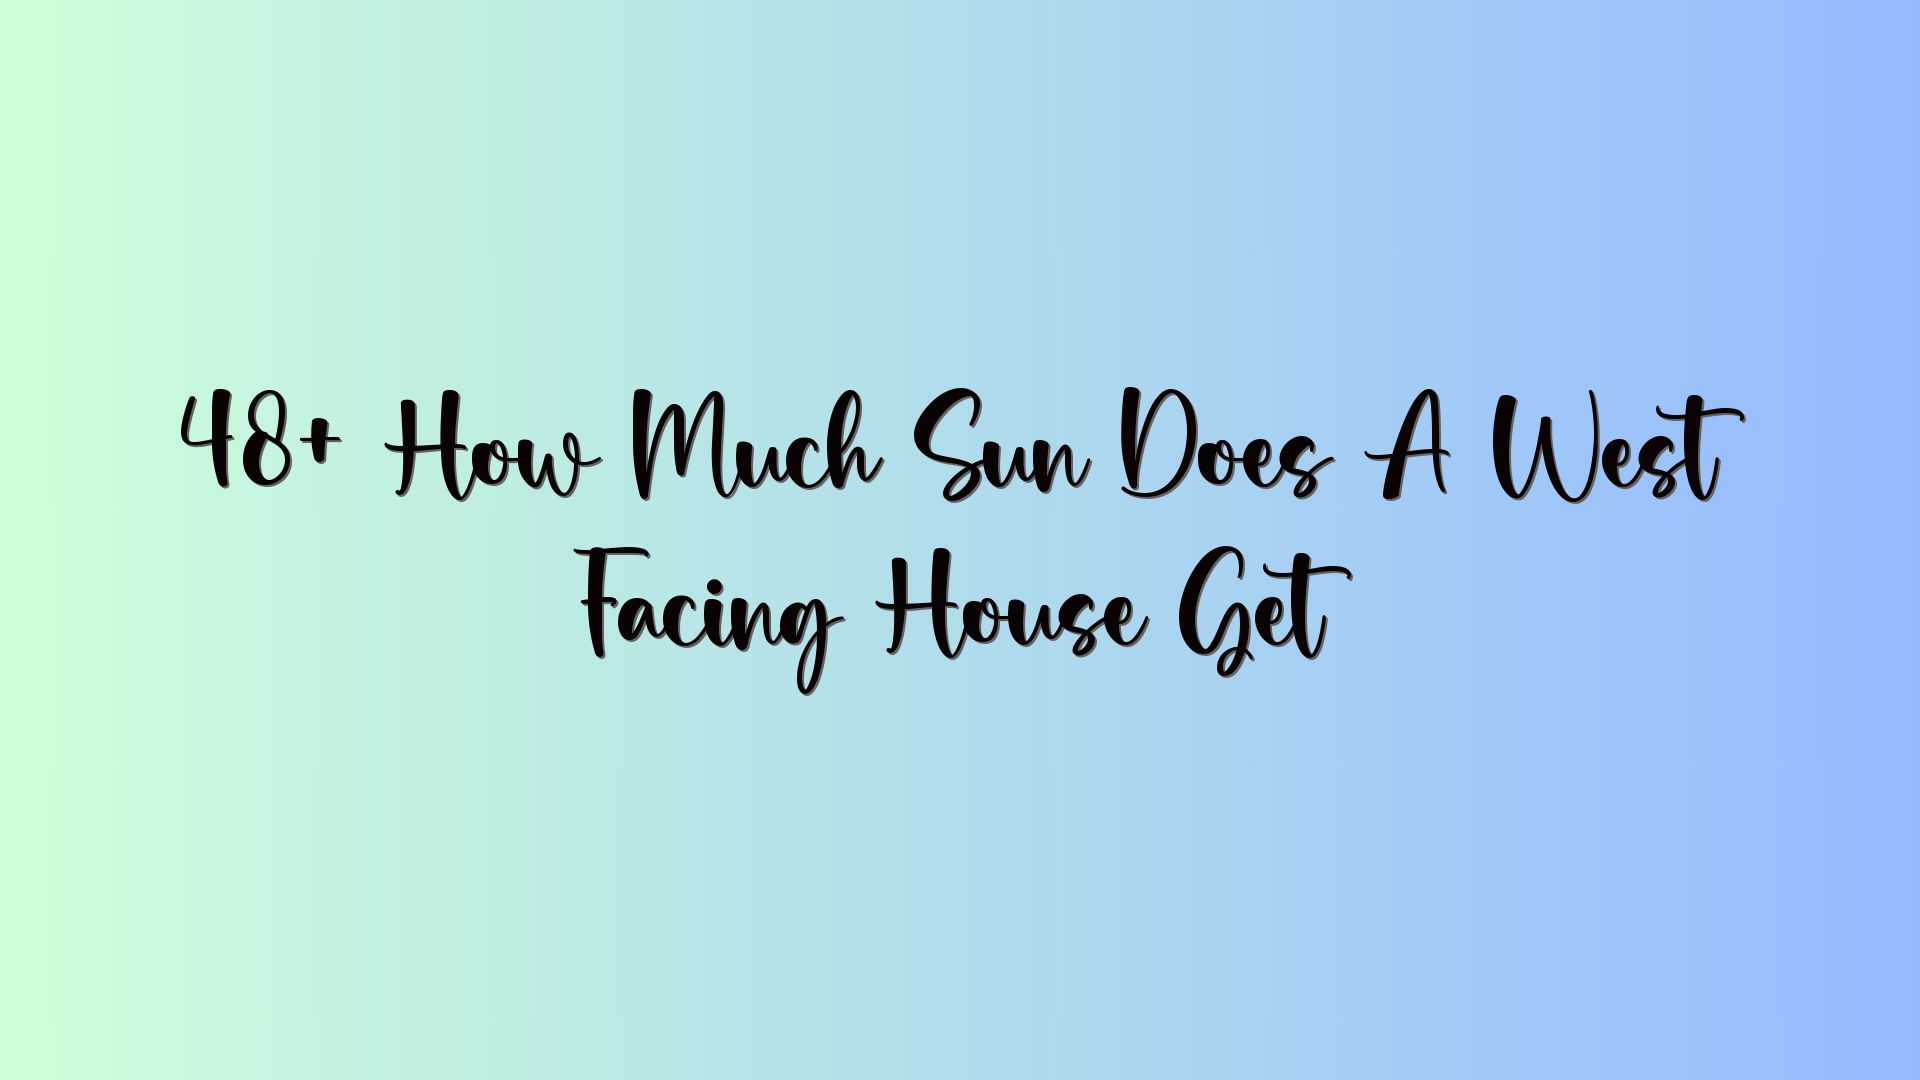 48+ How Much Sun Does A West Facing House Get